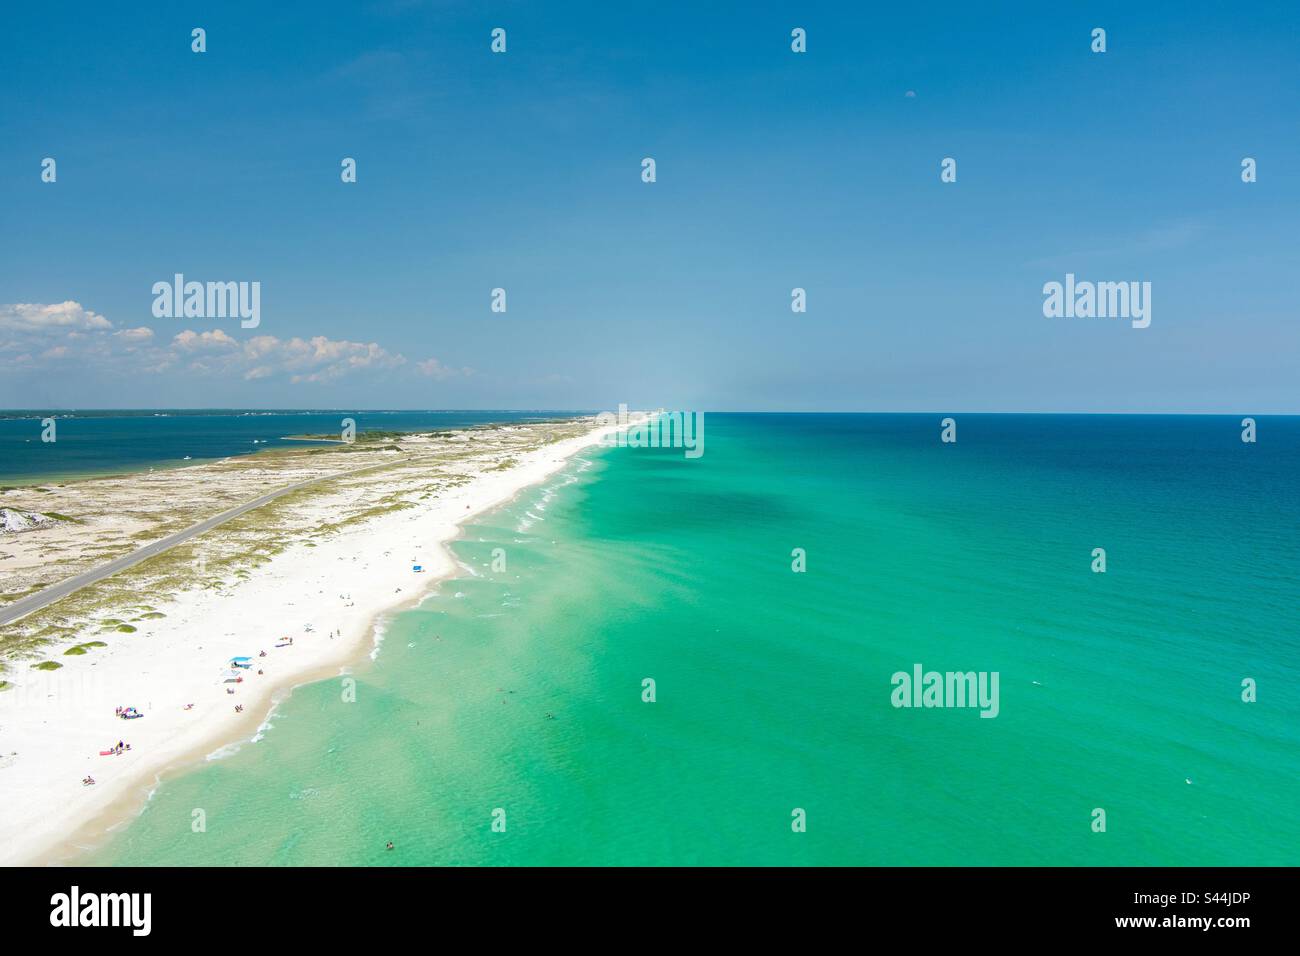 Aerial view of the beach in Pensacola, Florida Stock Photo